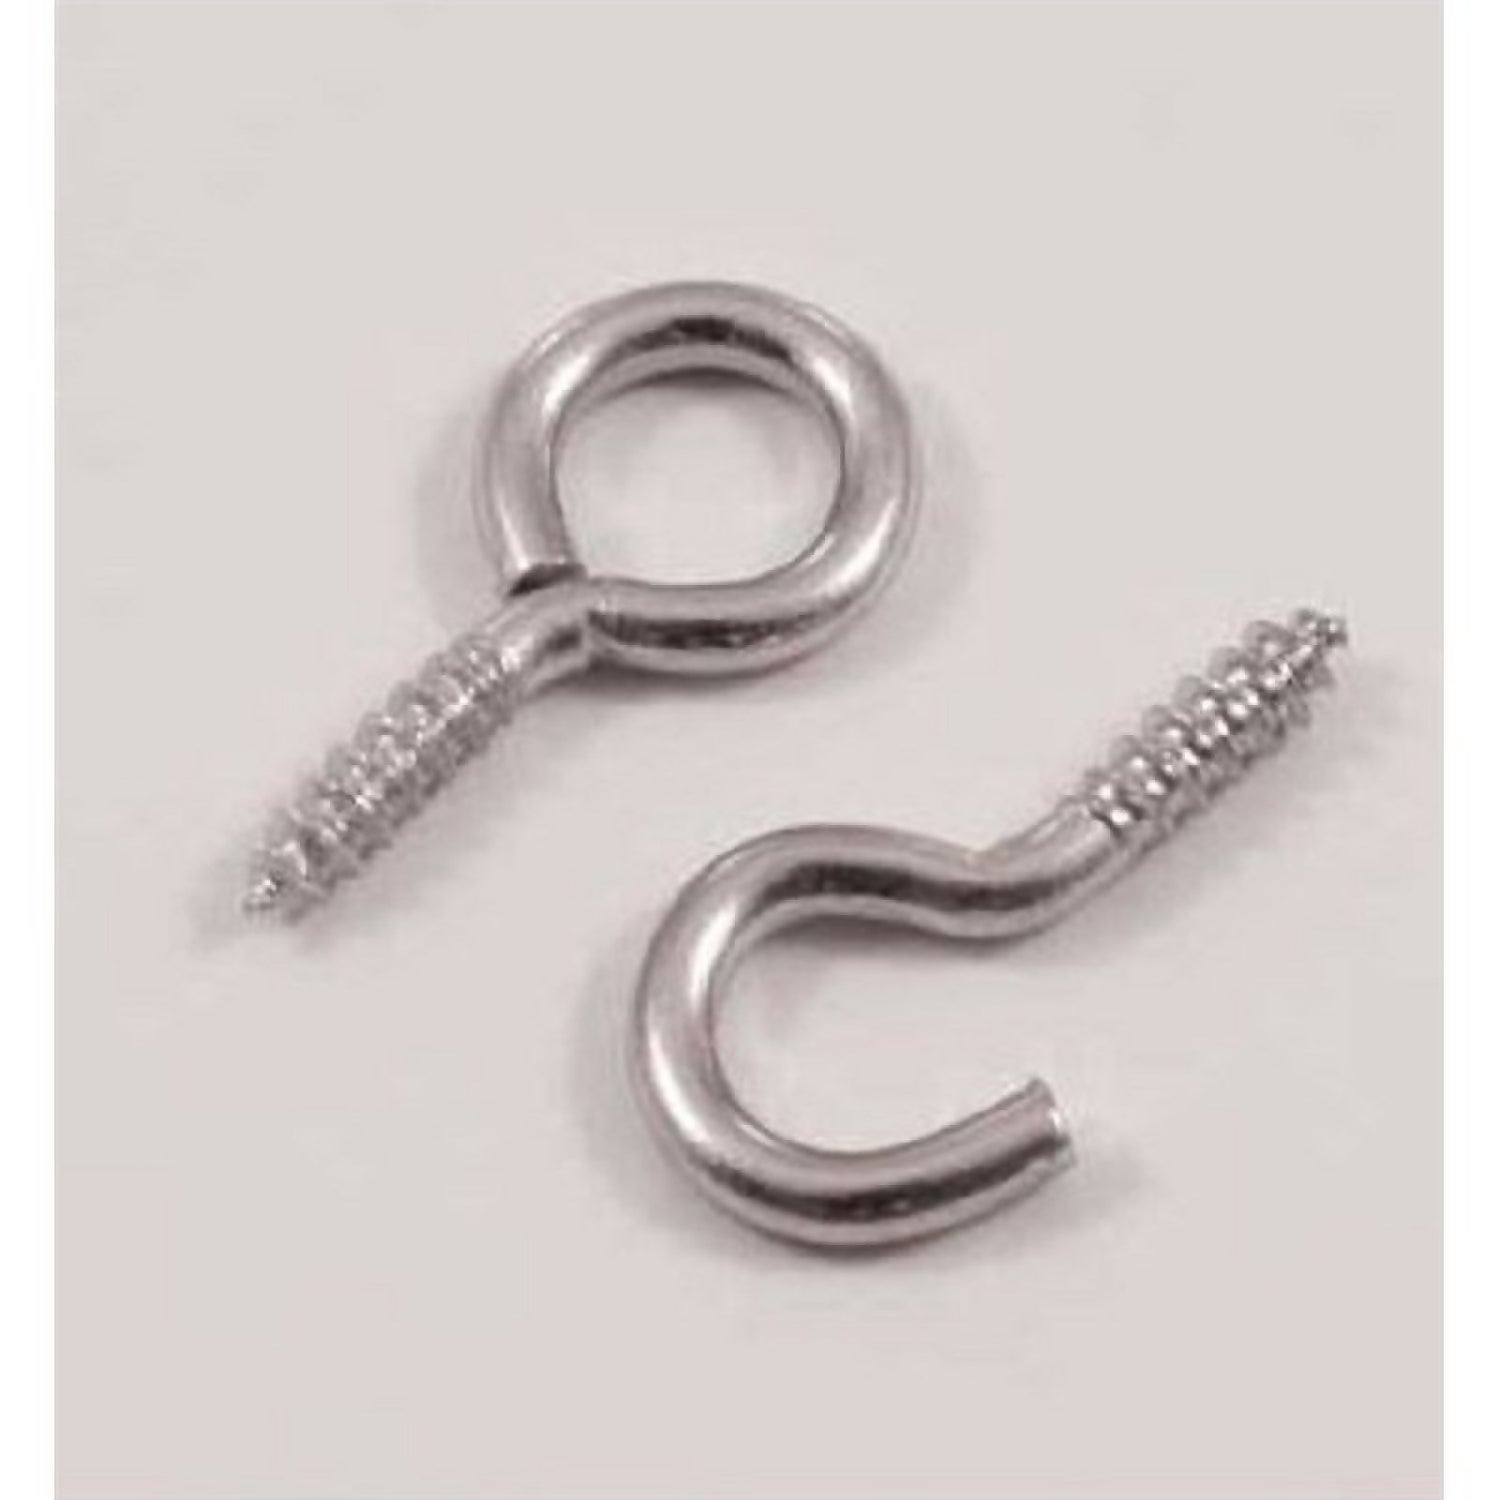 Screw Hooks and Eyes - Zinc Plated - 8 Pairs